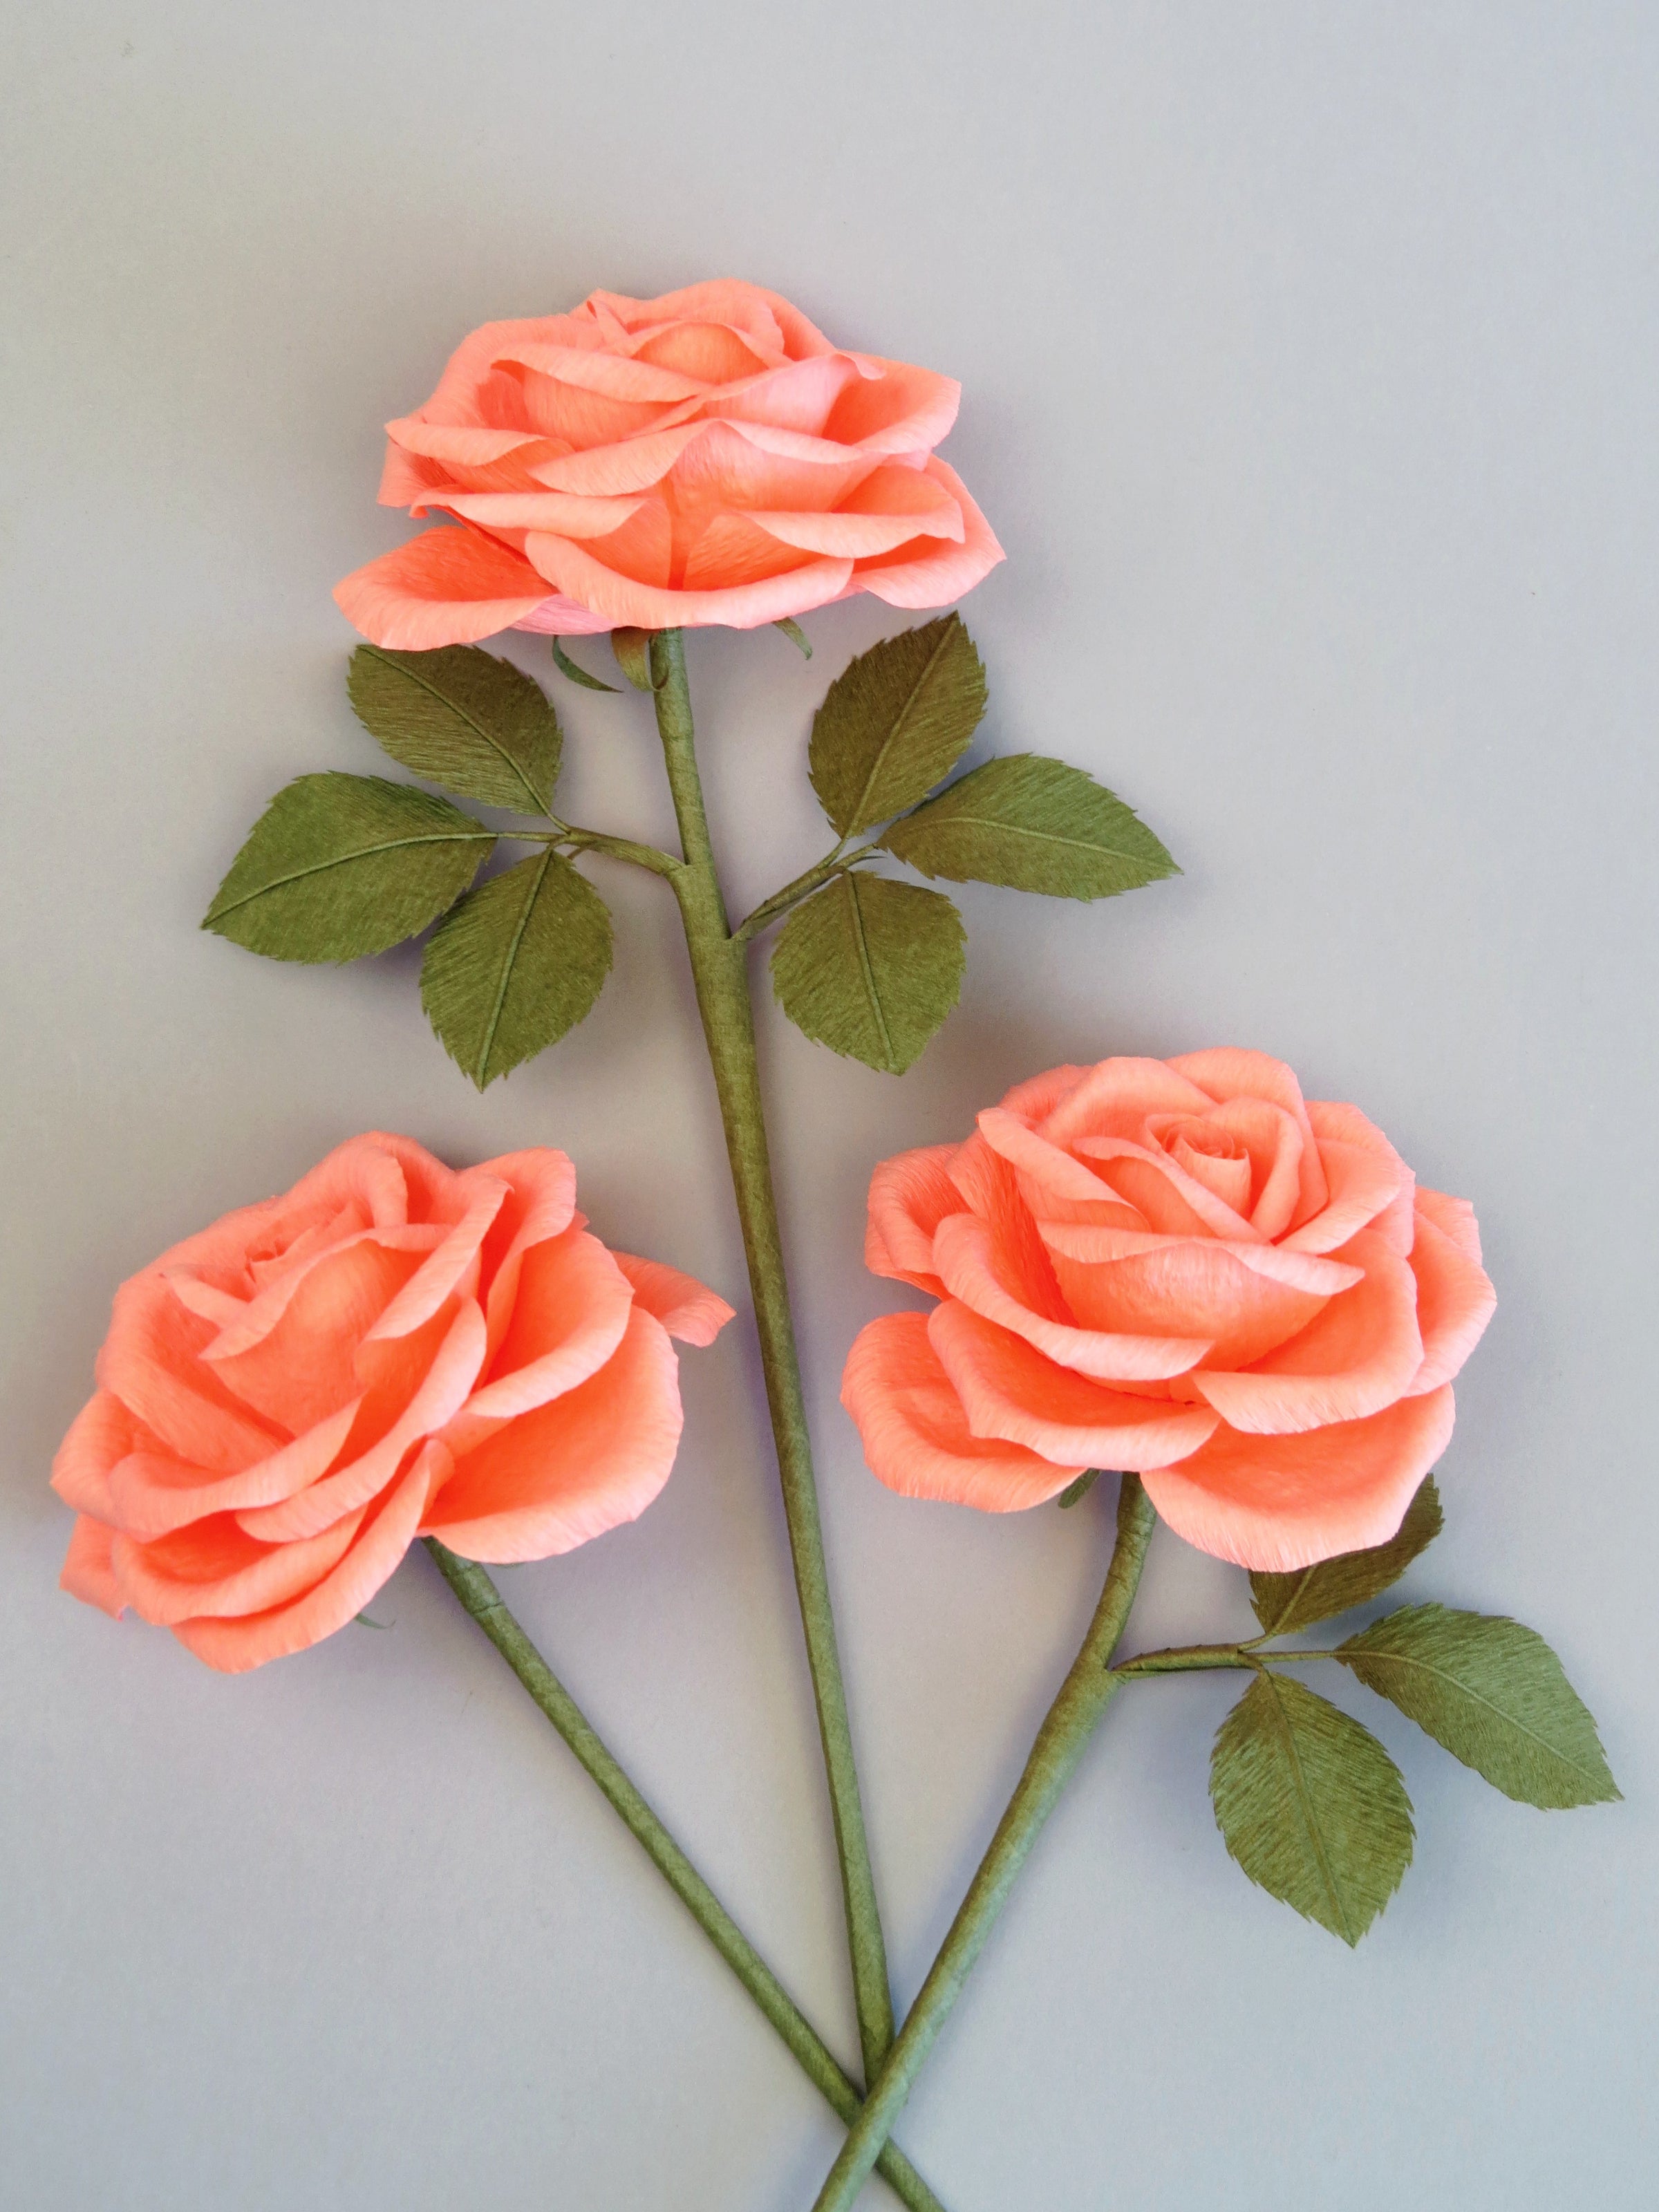 Three coral pink crepe paper roses randomly lying next to each other on a light grey background. The left rose is leafless, the middle rose has six olive green leaves attached and the right rose has three olive green leaves.